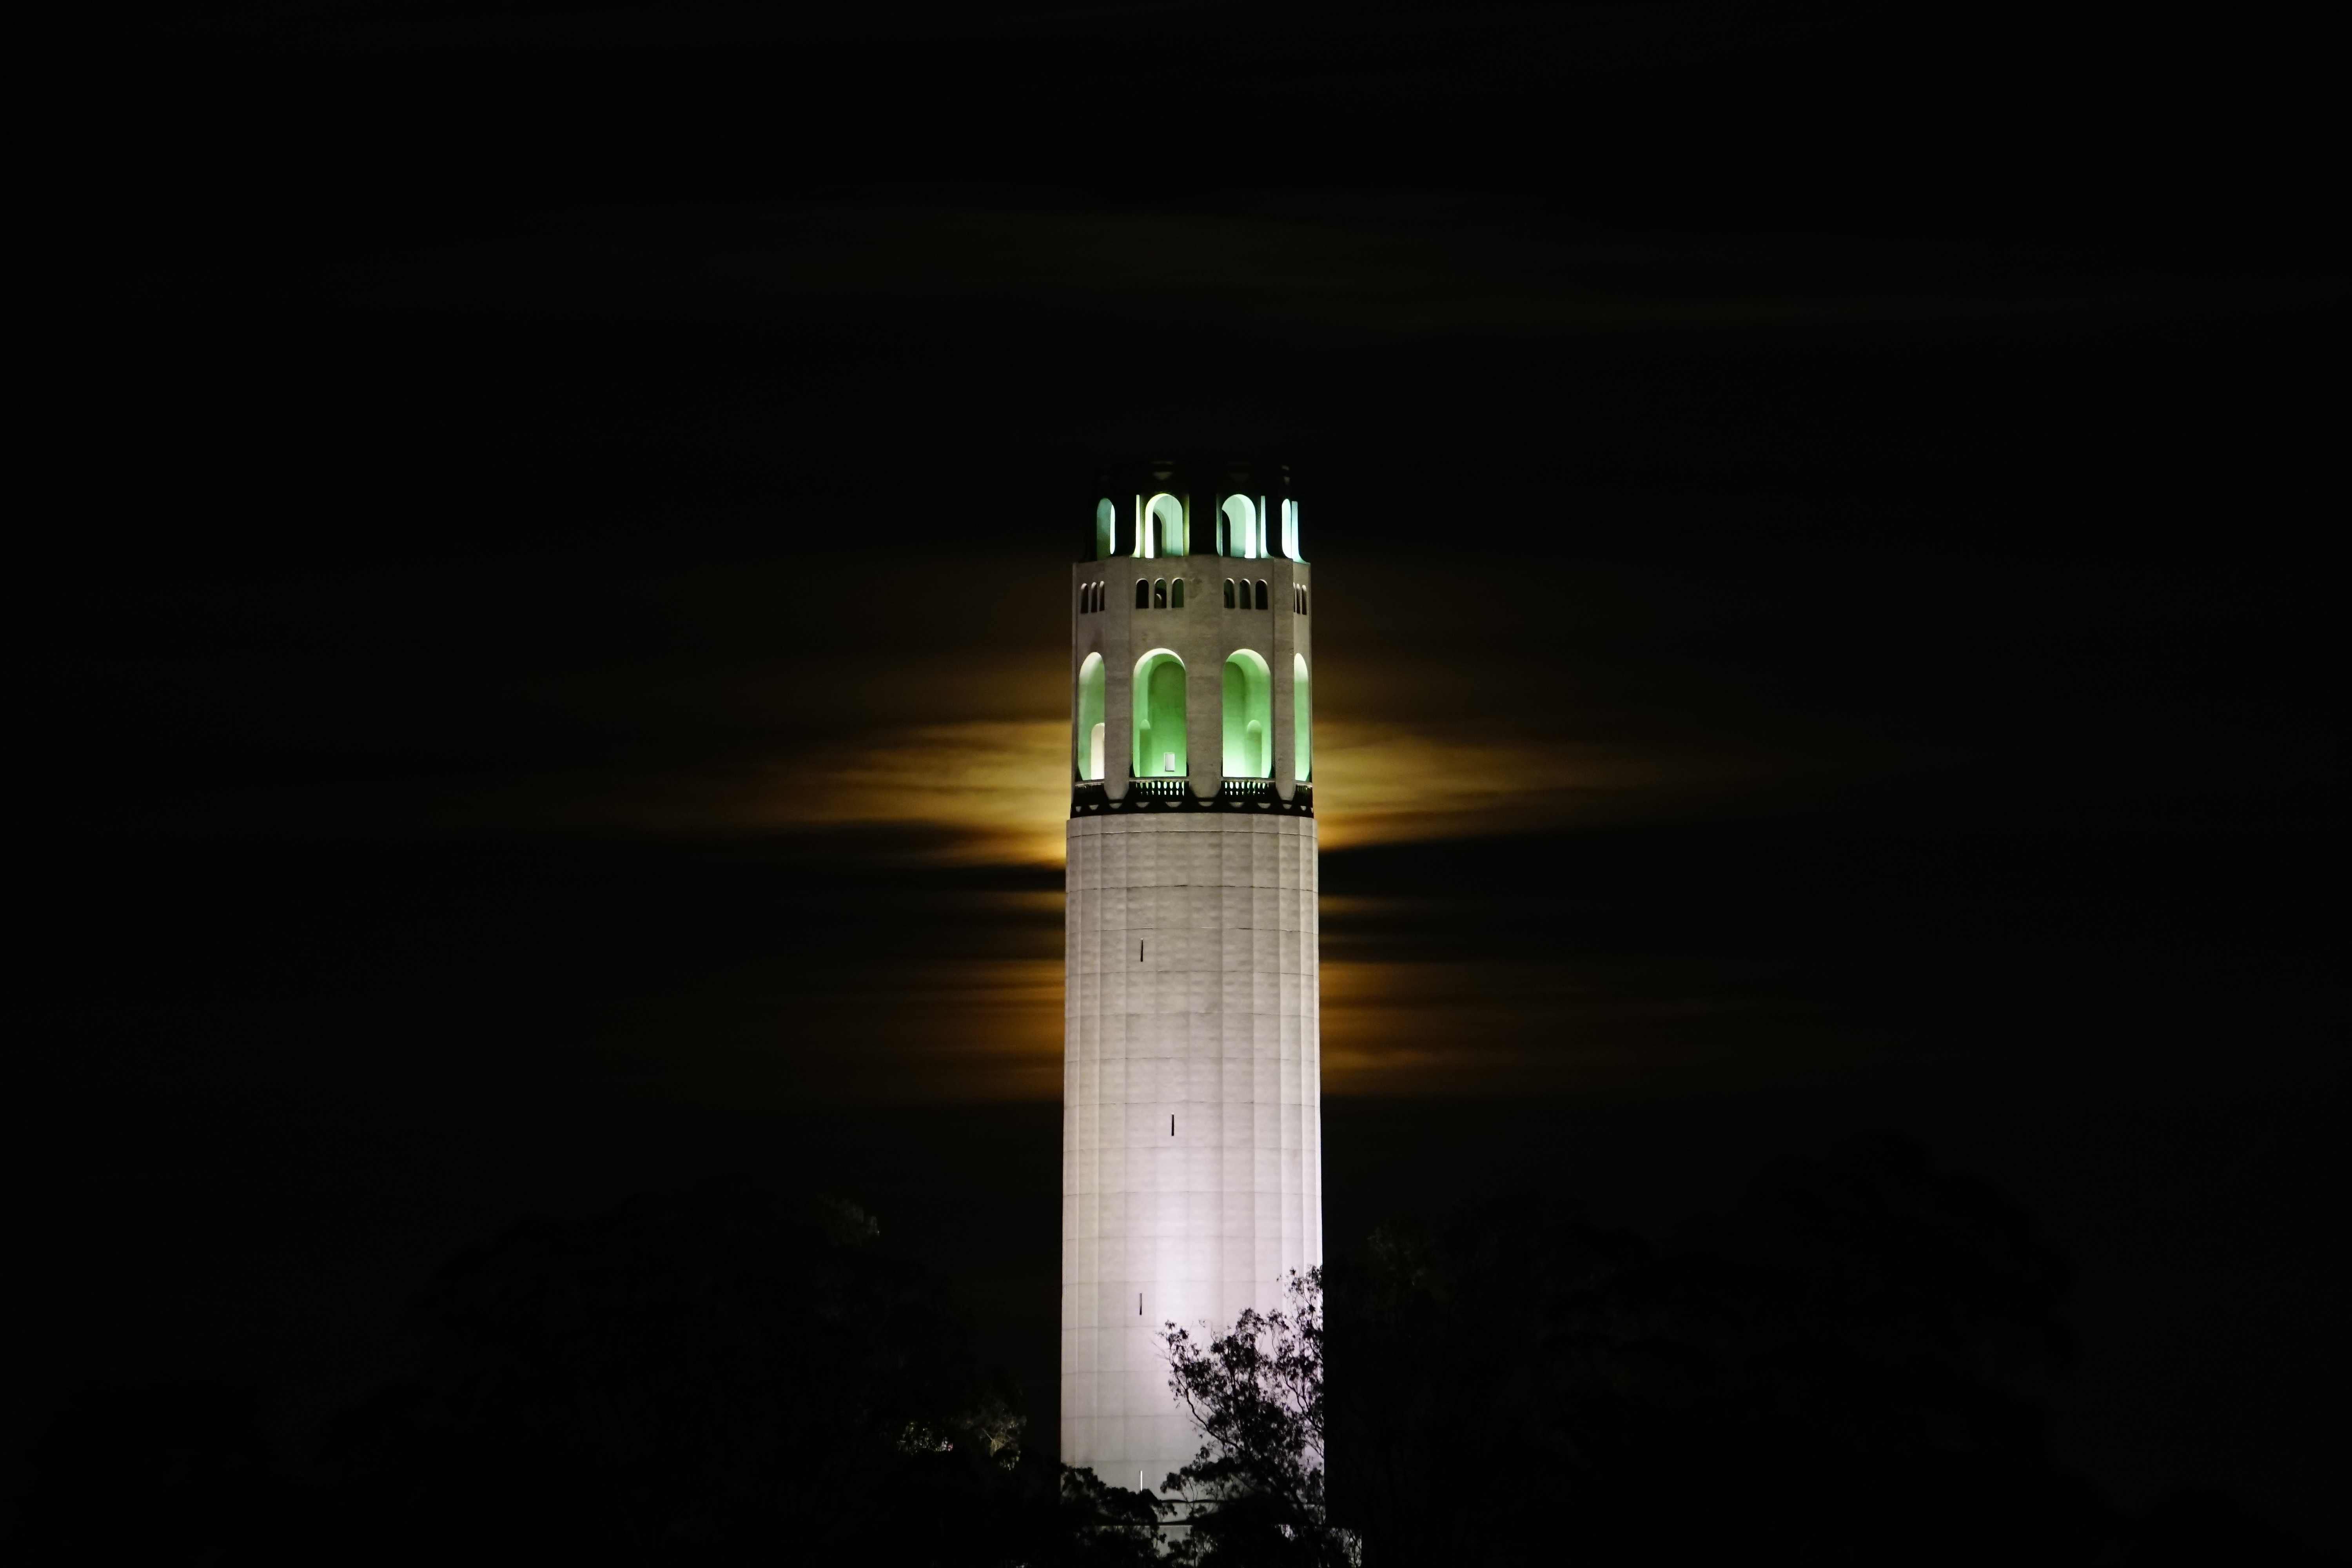 moon rises behind Coit Tower in San Francisco